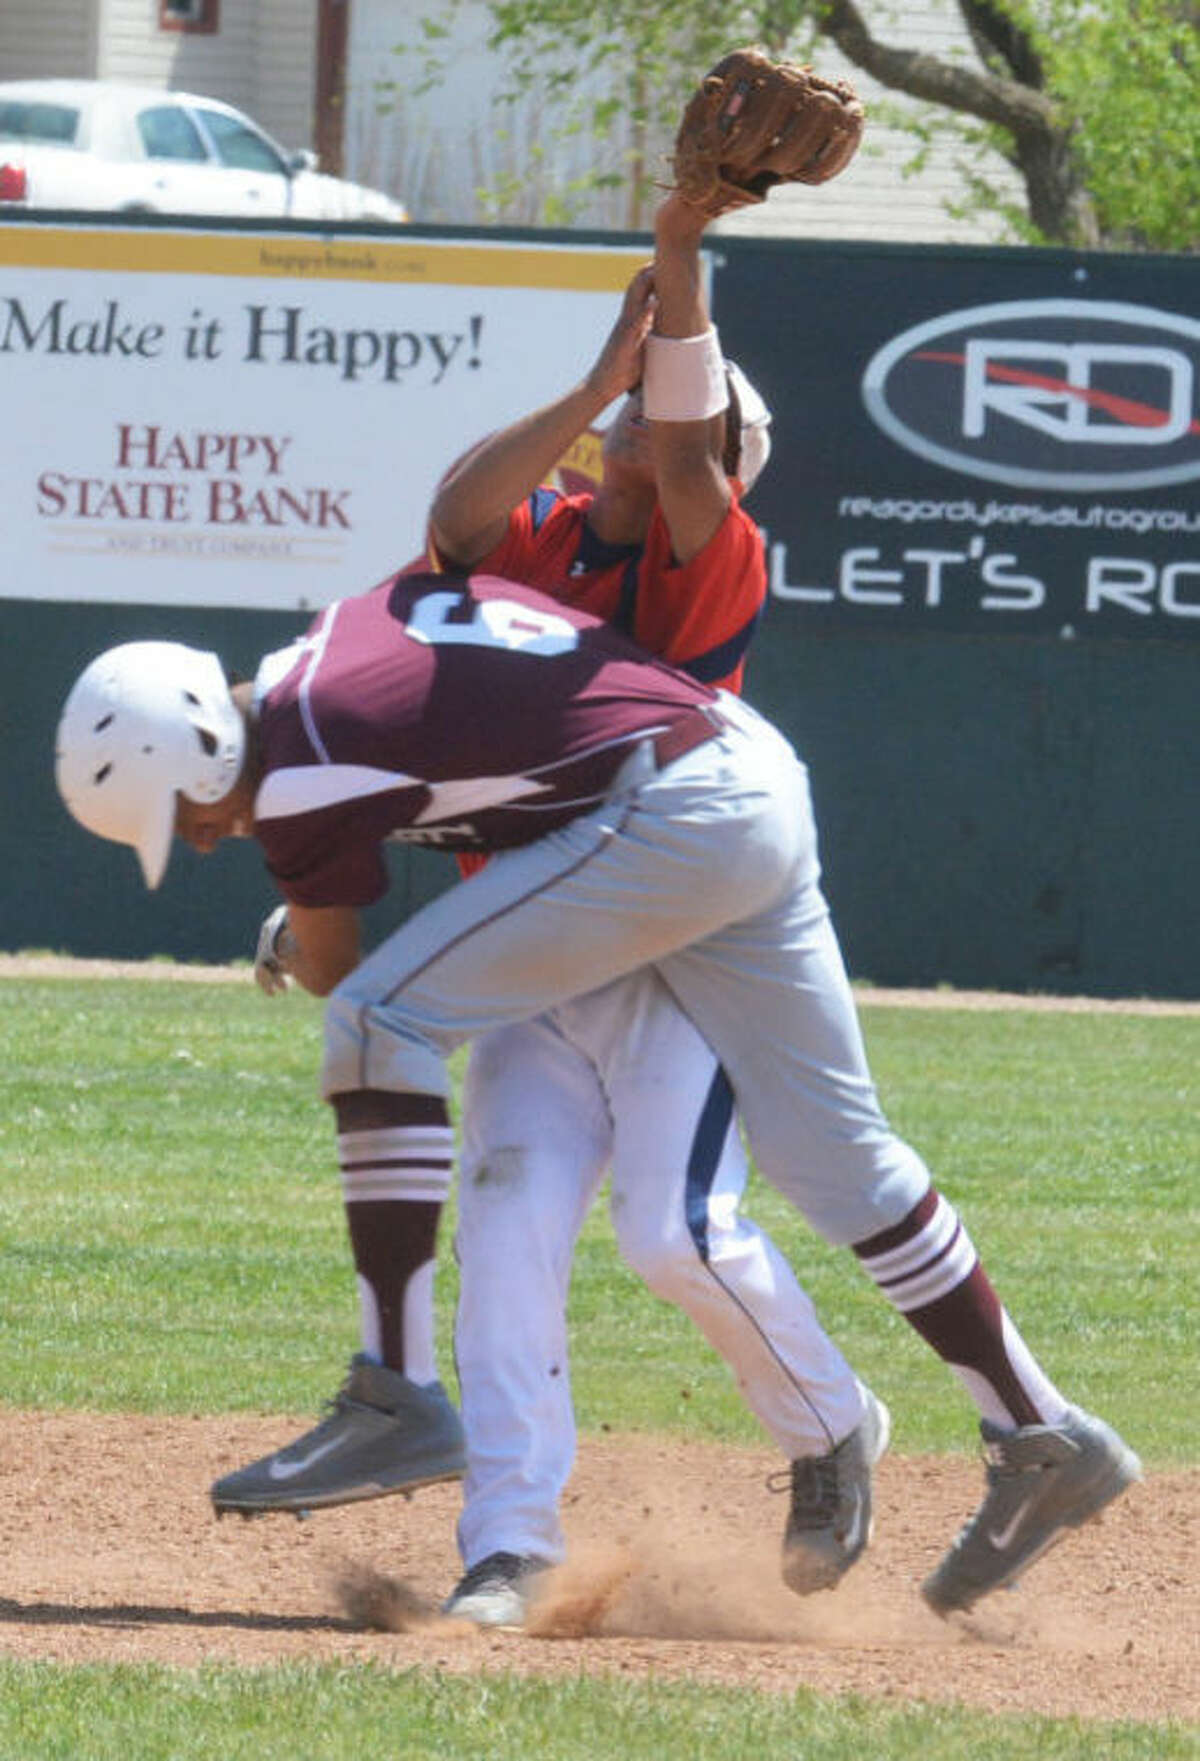 Hereford’s Payton Gonzales (6) runs into Plainview shortstop Danny Martinez as he tries to catch a popup in the sixth inning Friday. The ball dropped, but the runner was called out on the play for interfering with the fielder.